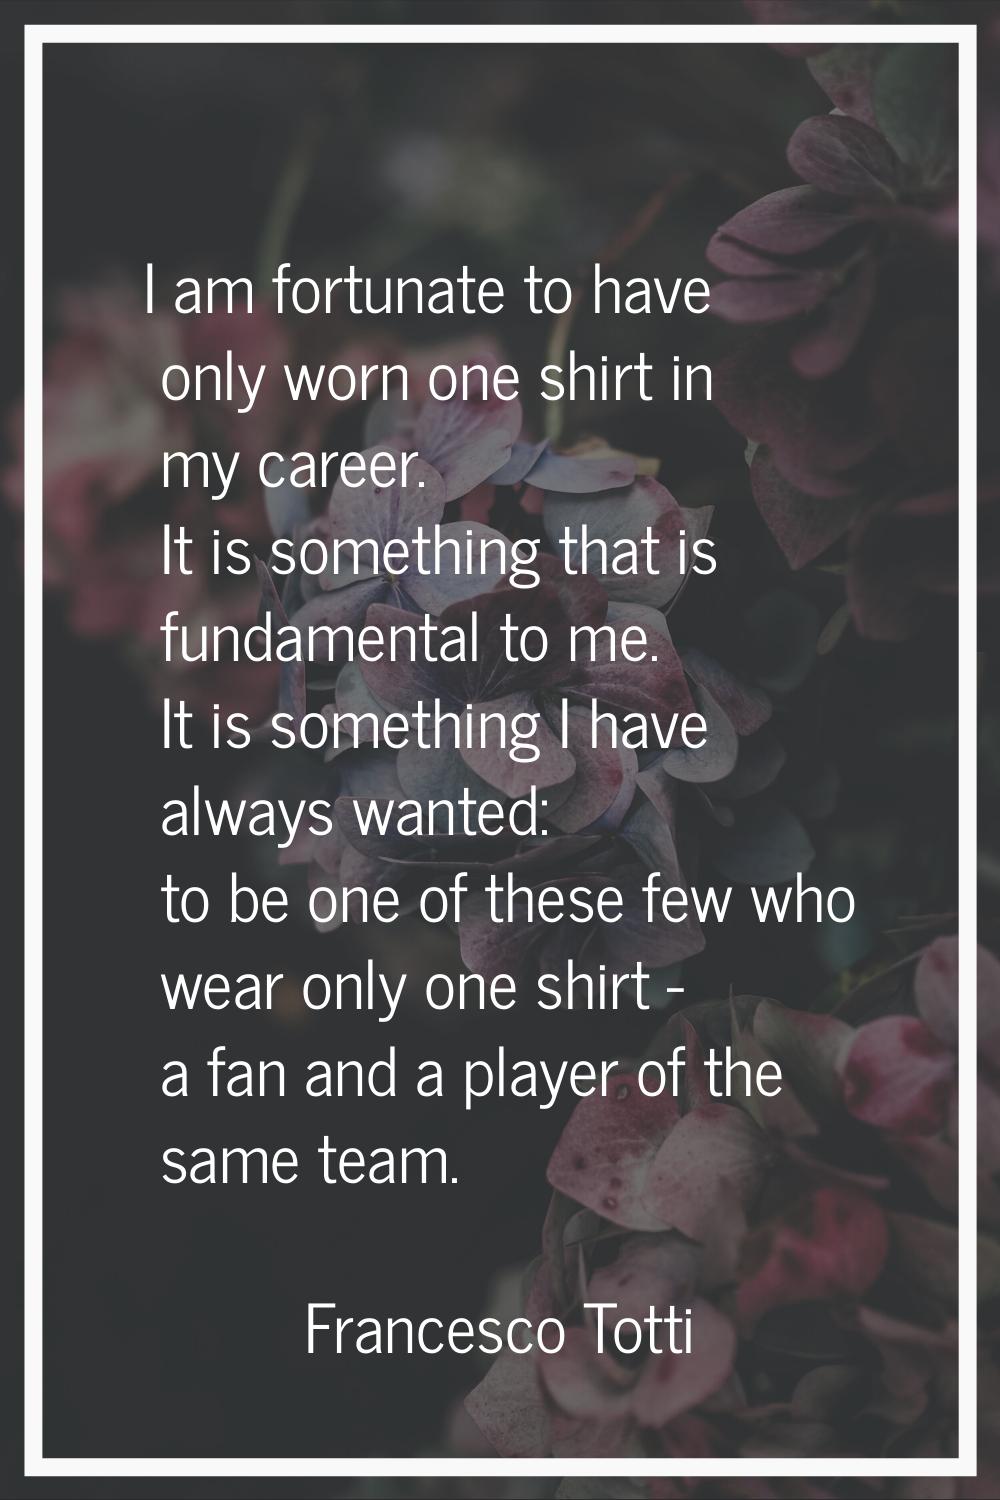 I am fortunate to have only worn one shirt in my career. It is something that is fundamental to me.